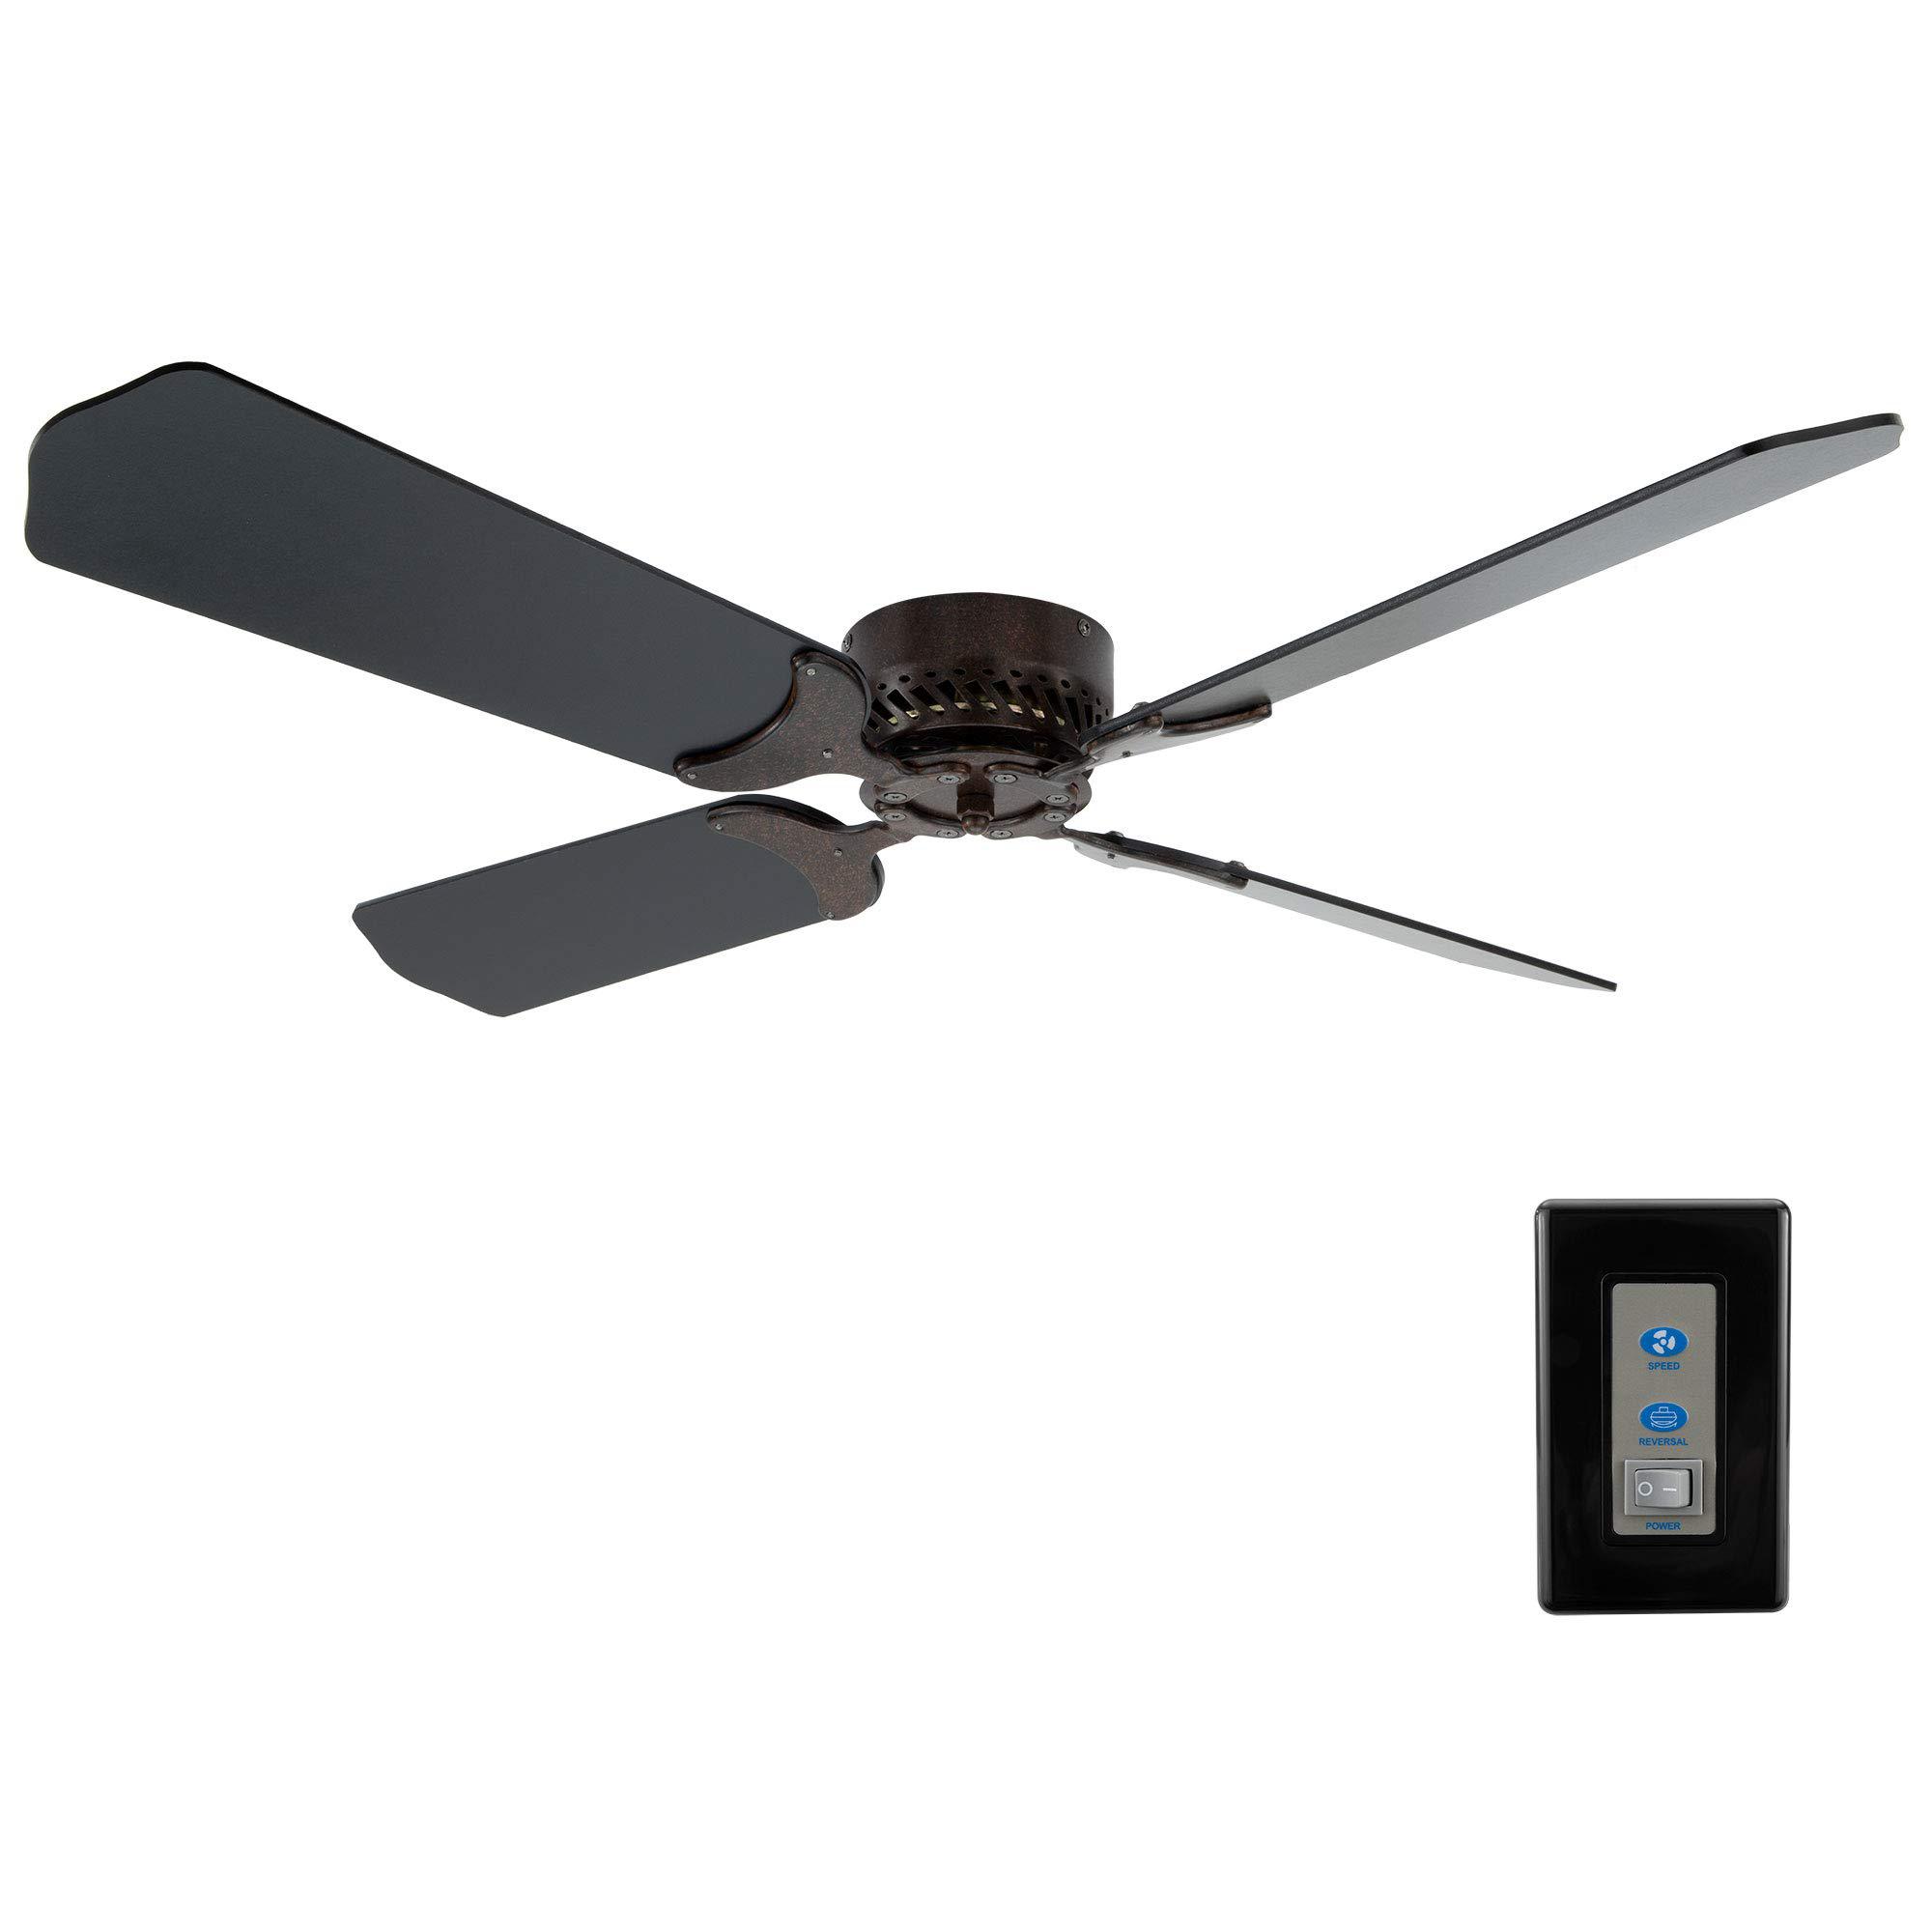 recpro rv ceiling fan | 12v | 42" brushed nickel/rubbed bronze finish | 4 blades | includes switch (rubbed bronze - black)